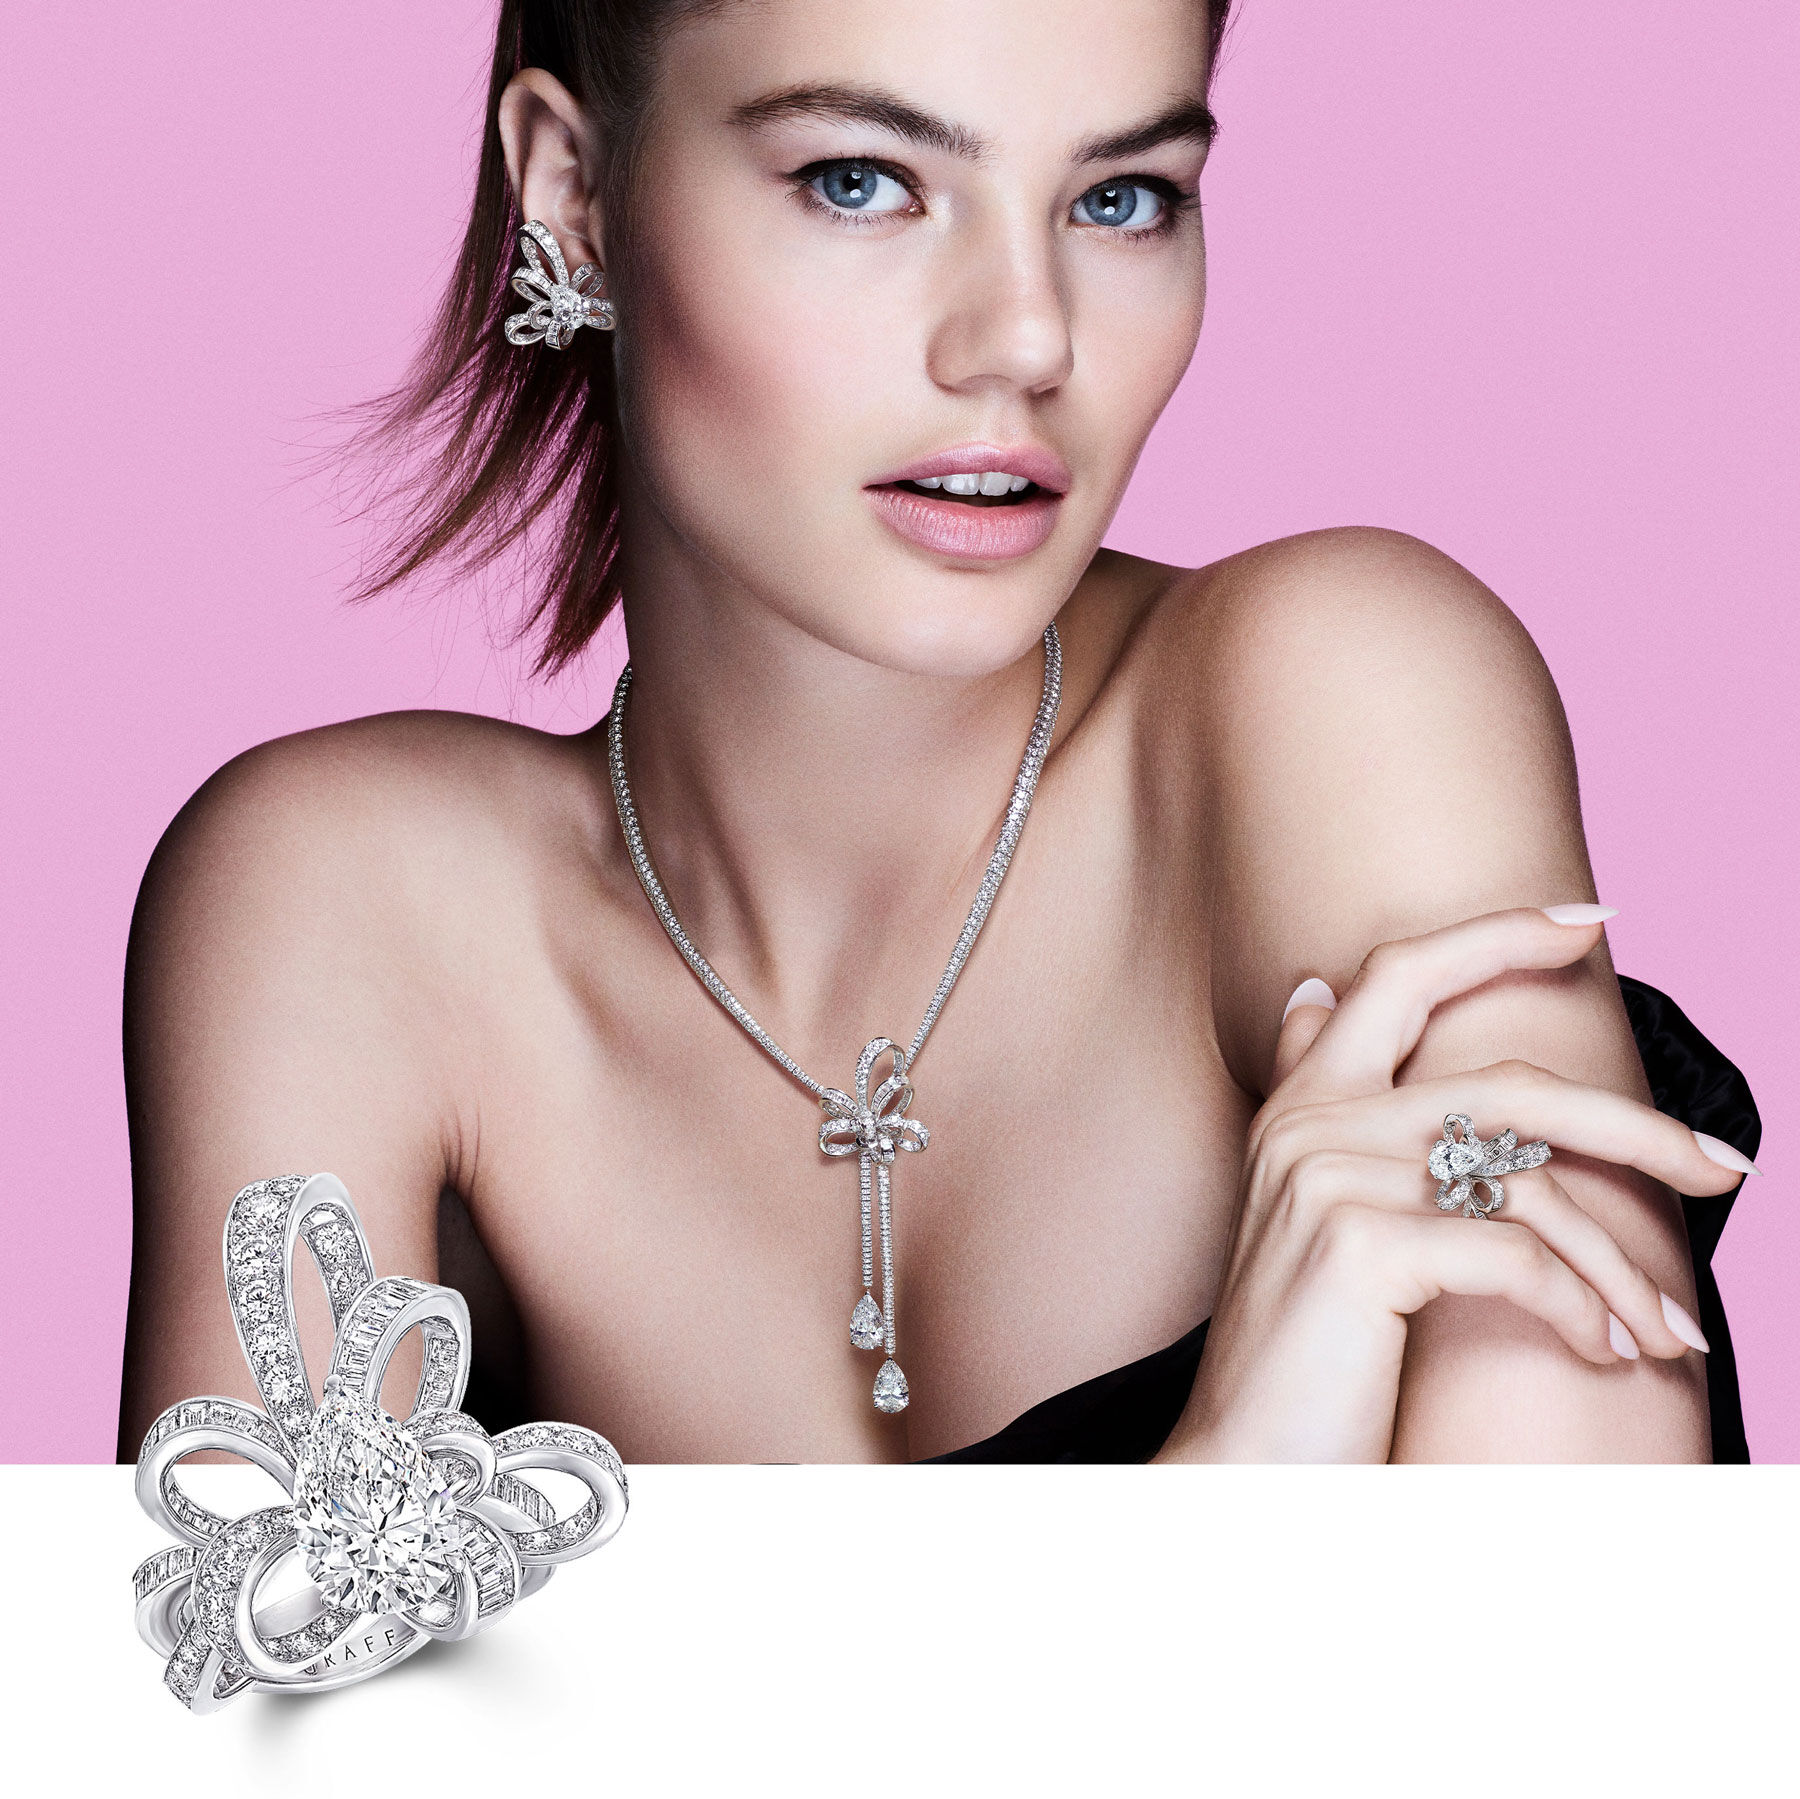 Model wears the Graff Tilda's Bow diamond jewellery with a featured ring